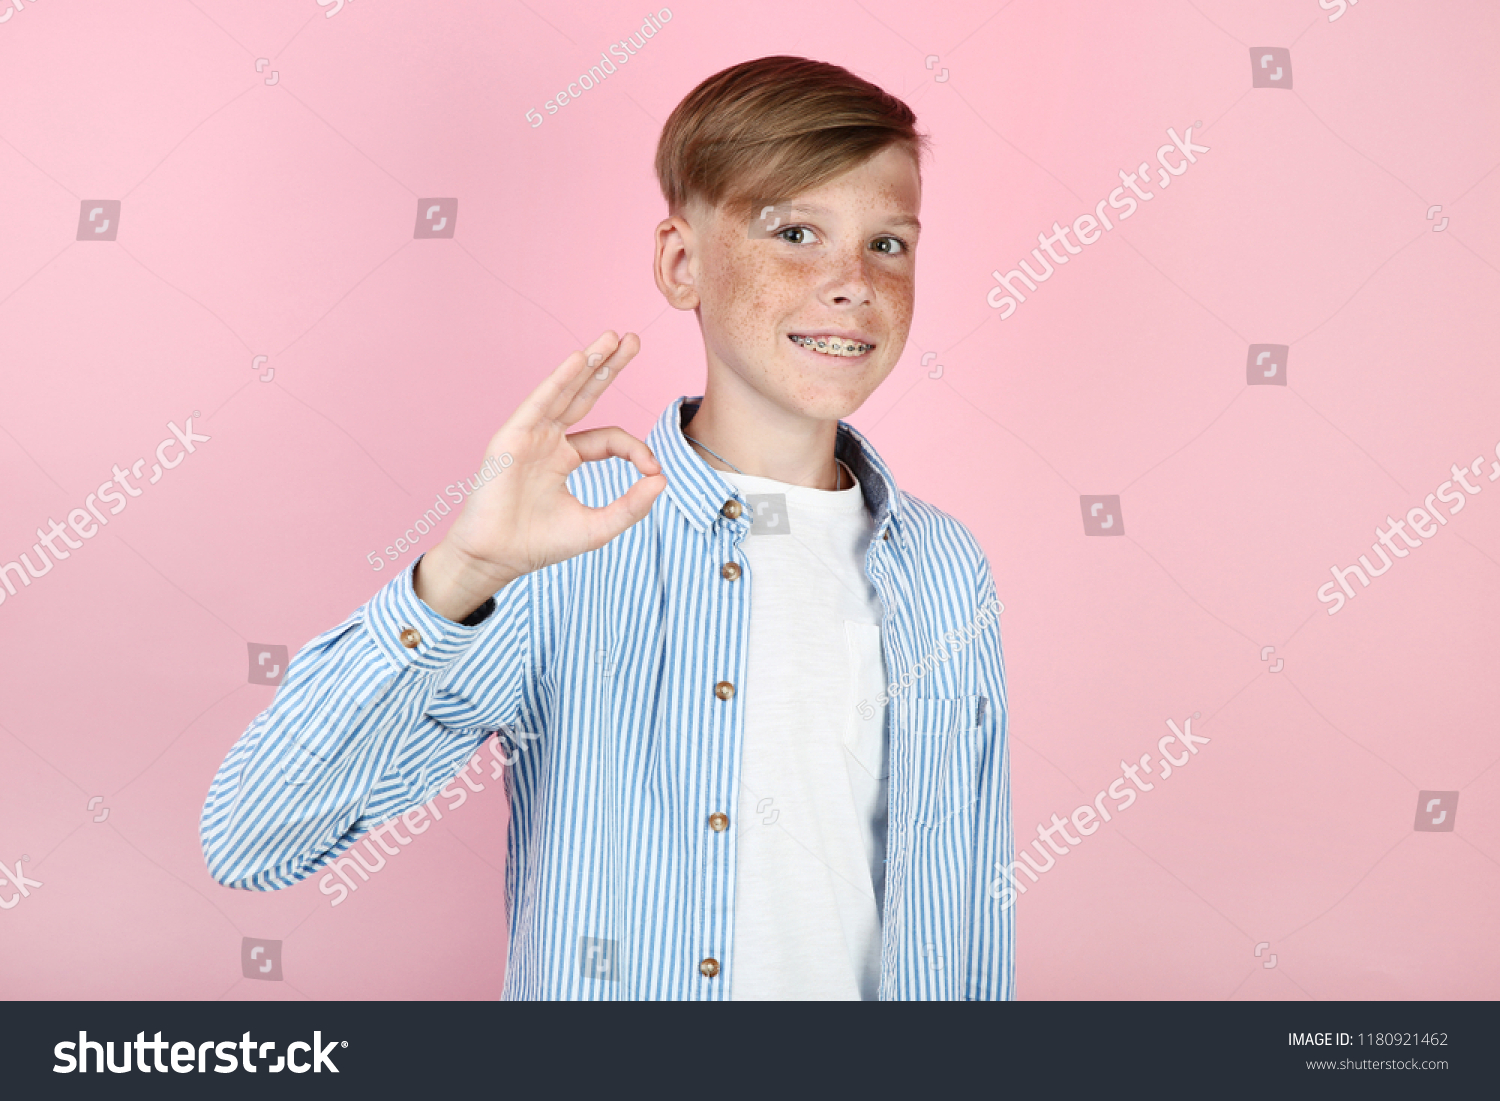 Beautiful young boy with dental braces on pink background #1180921462